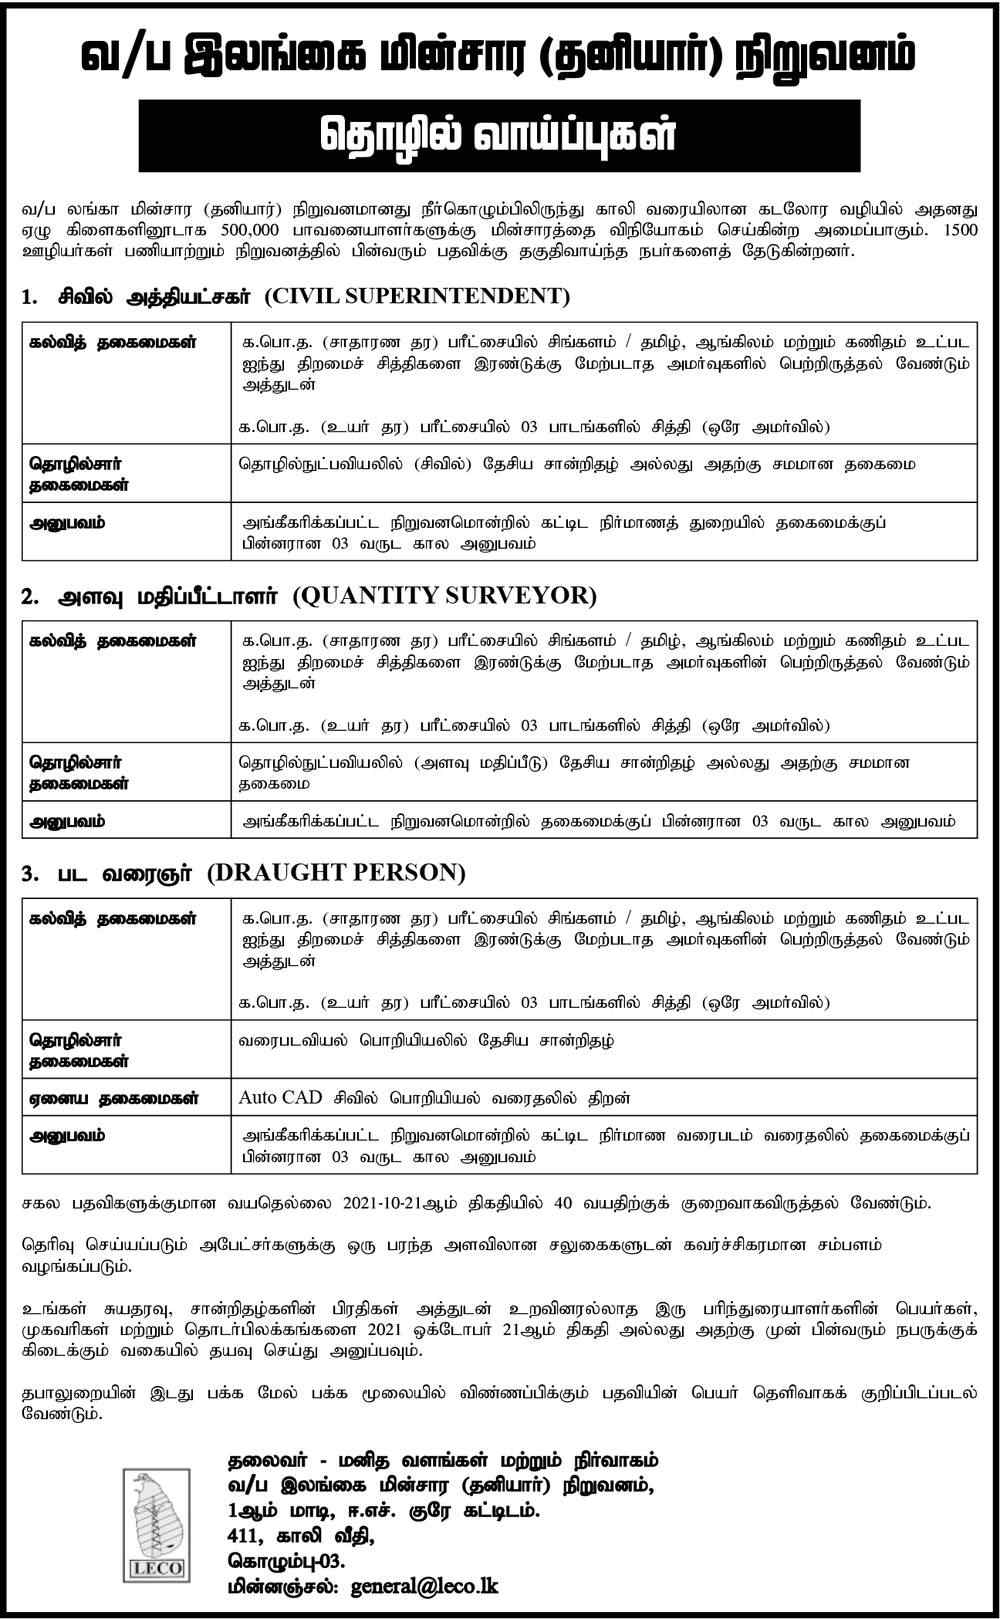 Civil Superintendent, Quantity Supervisor, Draught Person - Lanka Electricity Company (Private) Limited Tamil